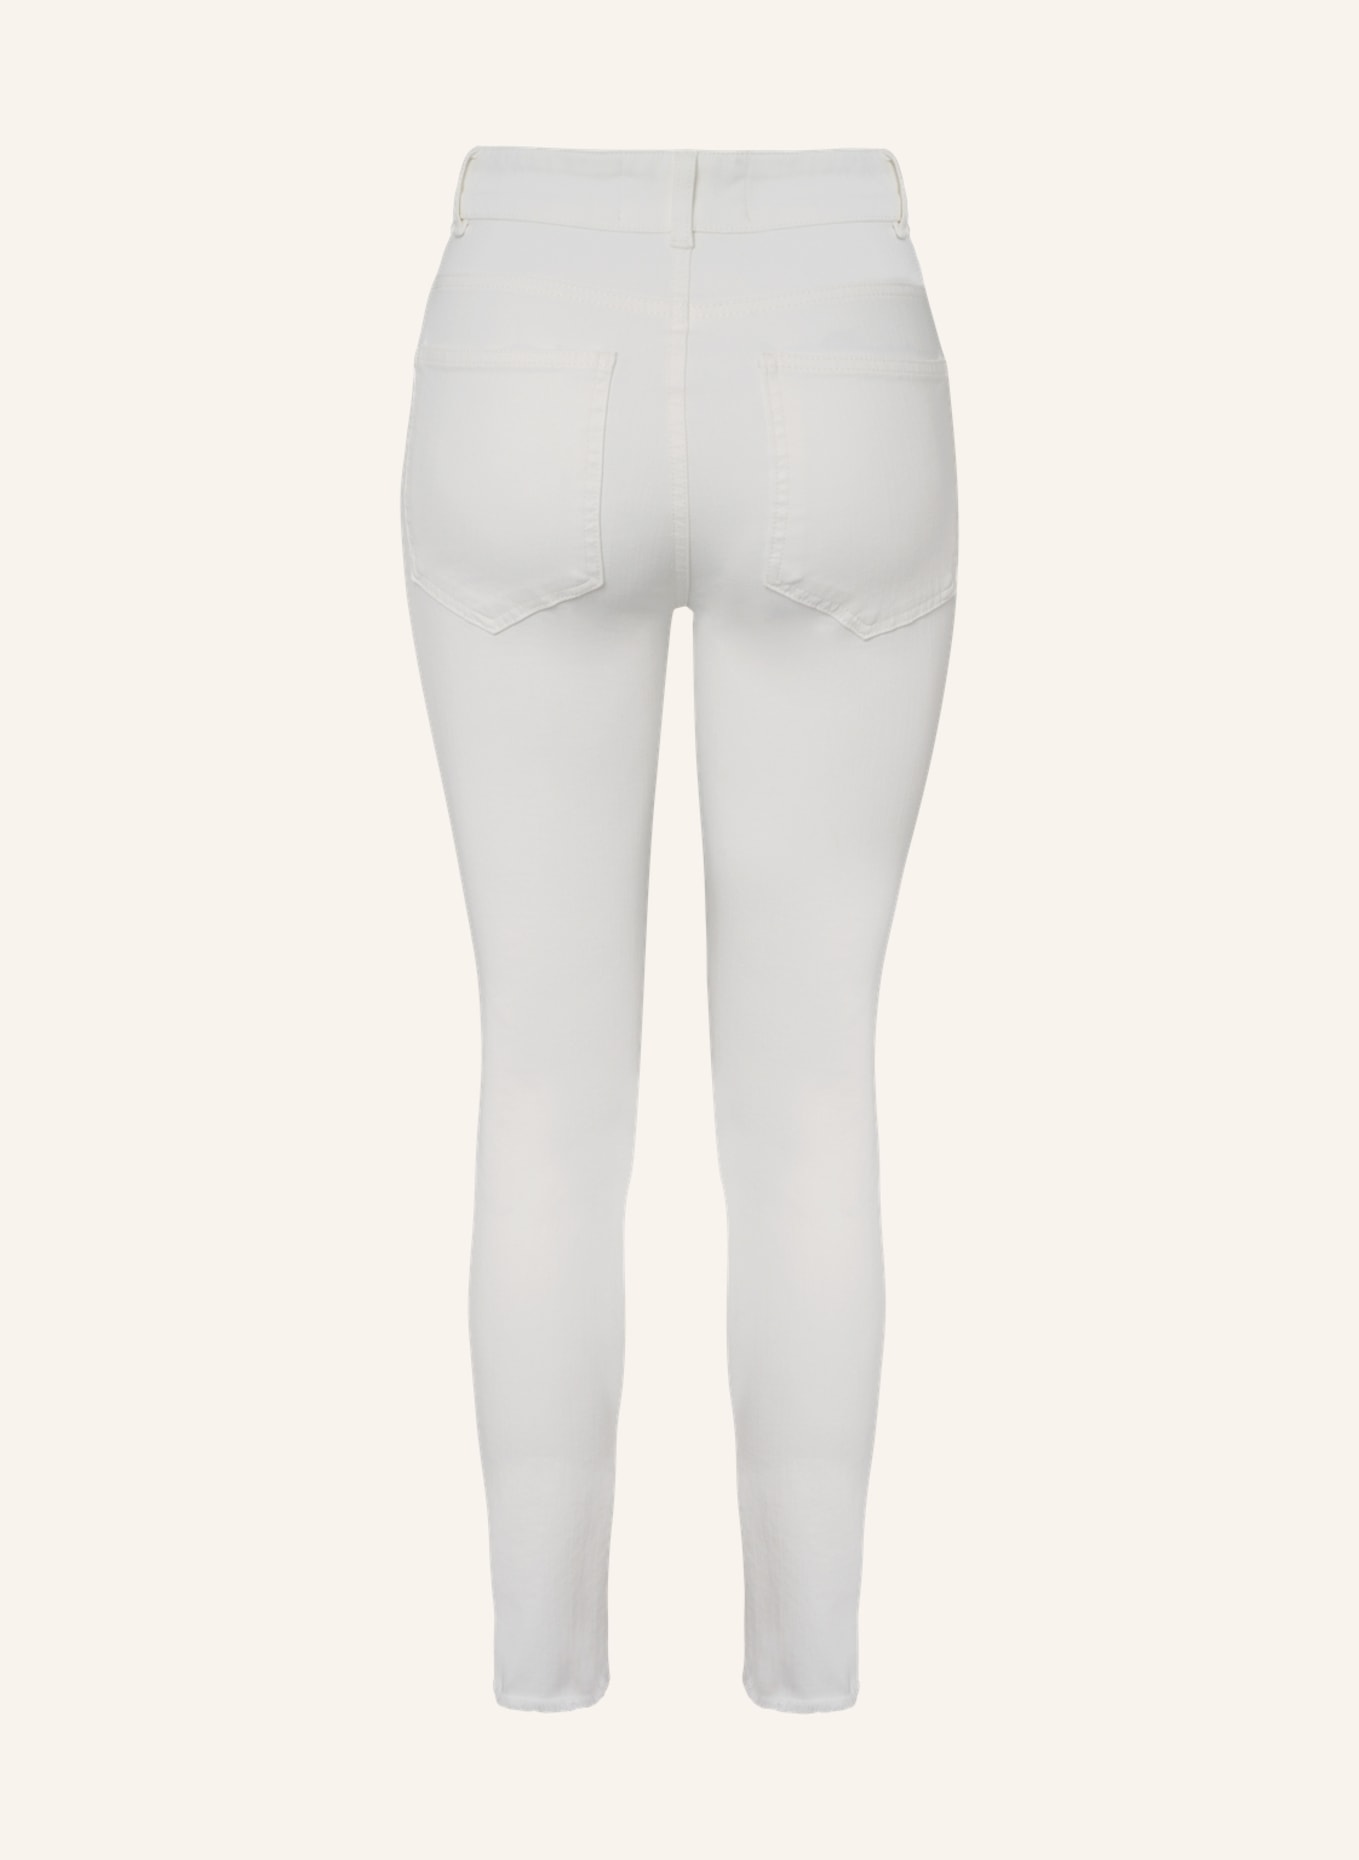 ITEM m6 7/8-Jeans CROPPED HIGH RISE mit Shaping-Effekt, Farbe: WEISS (Bild 3)